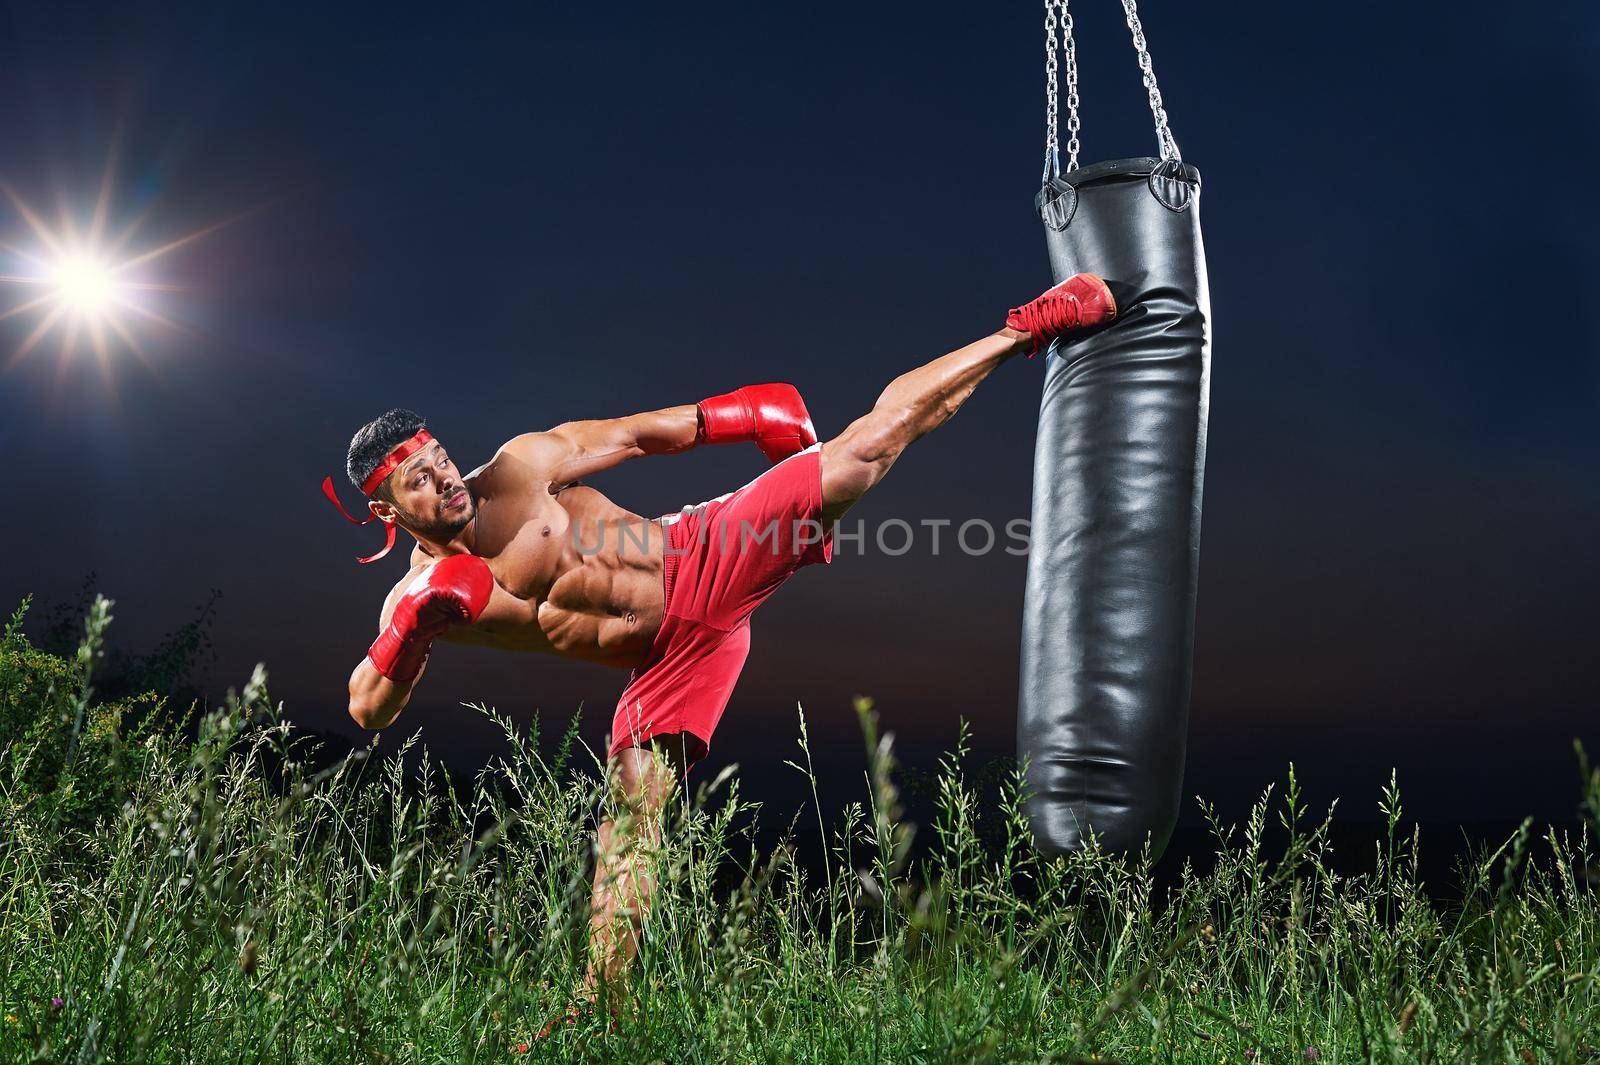 Horizontal shot of a kick boxer working out with a punching bag outdoors at night copyspace kicking training sports sportive motivation fitness muscles toning fit ripped strong lifestyle professional.